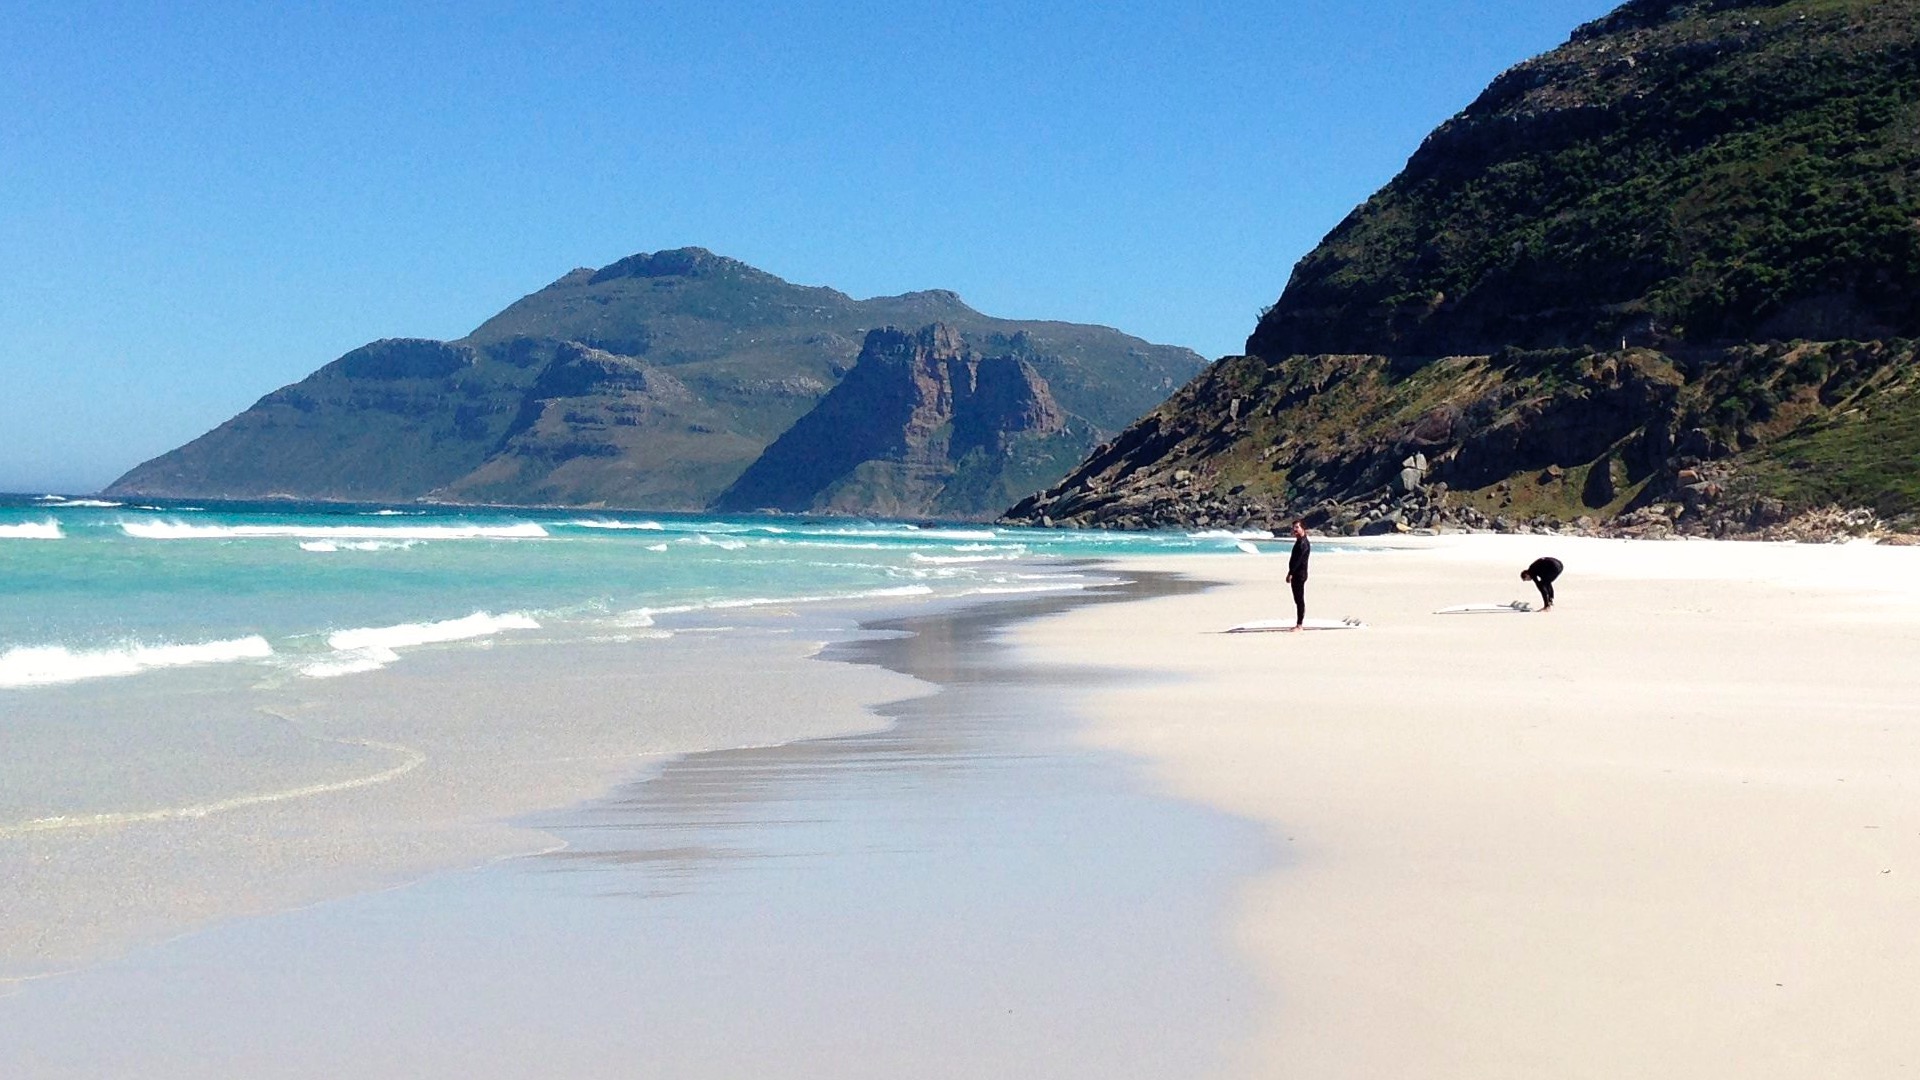 Cape Town has many beautiful beaches. In our opinion, Long Beach is the nicest!